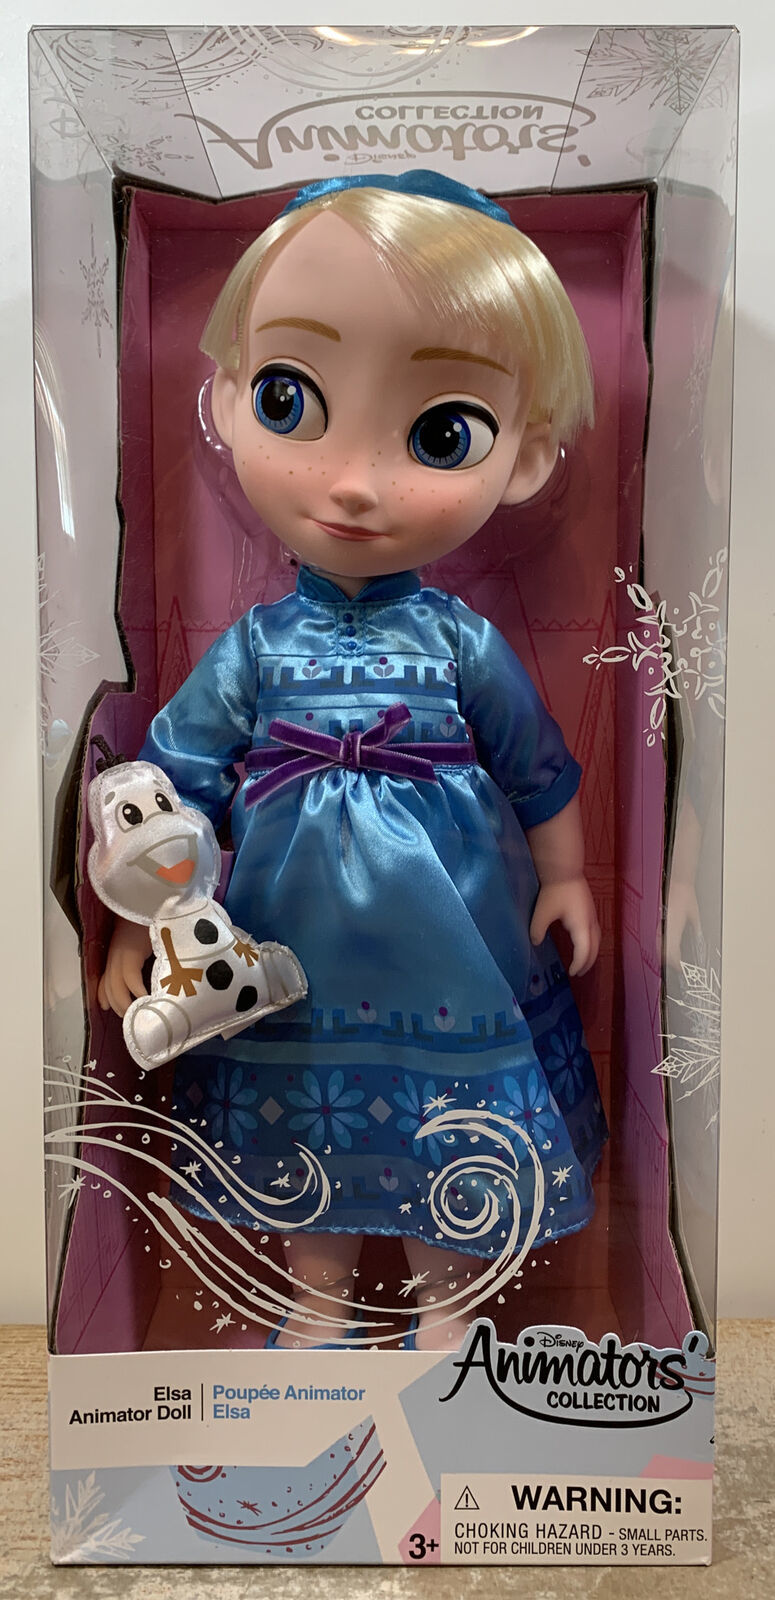 Primary image for Disney Store Animators' Collection Elsa Doll - Frozen - 16''Doll 